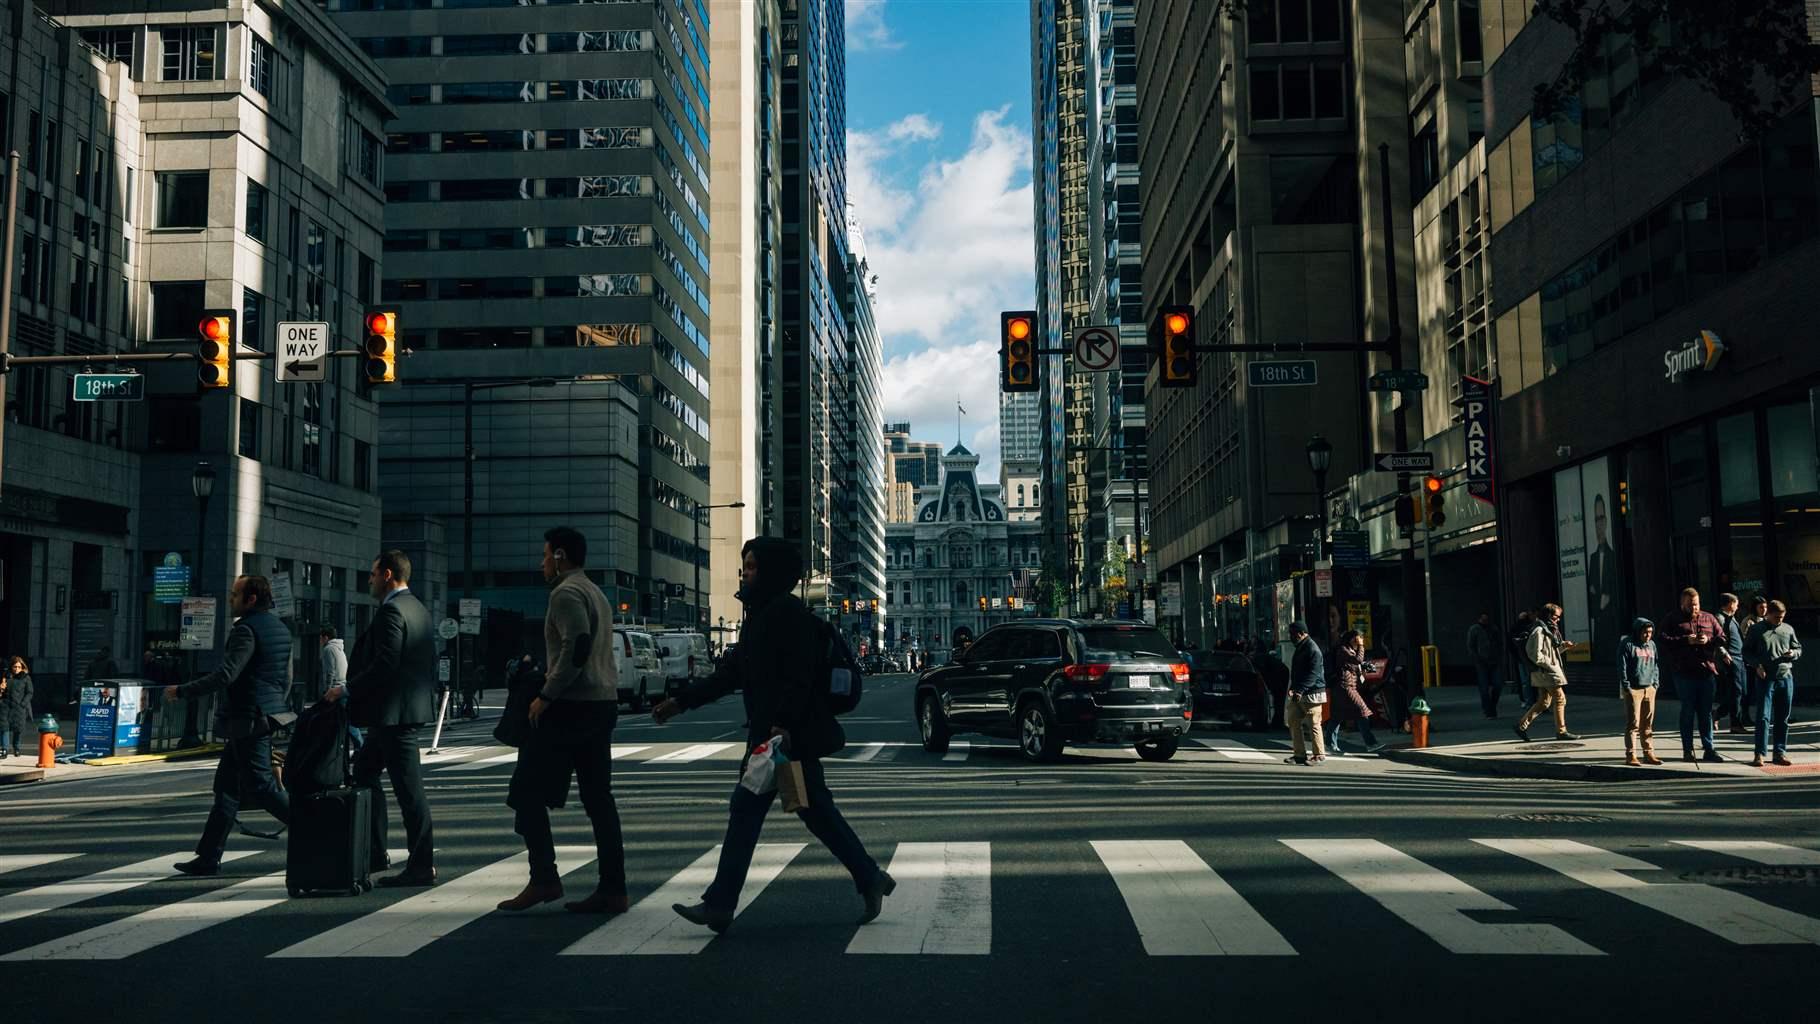 People hurrying through a busy city crosswalk.